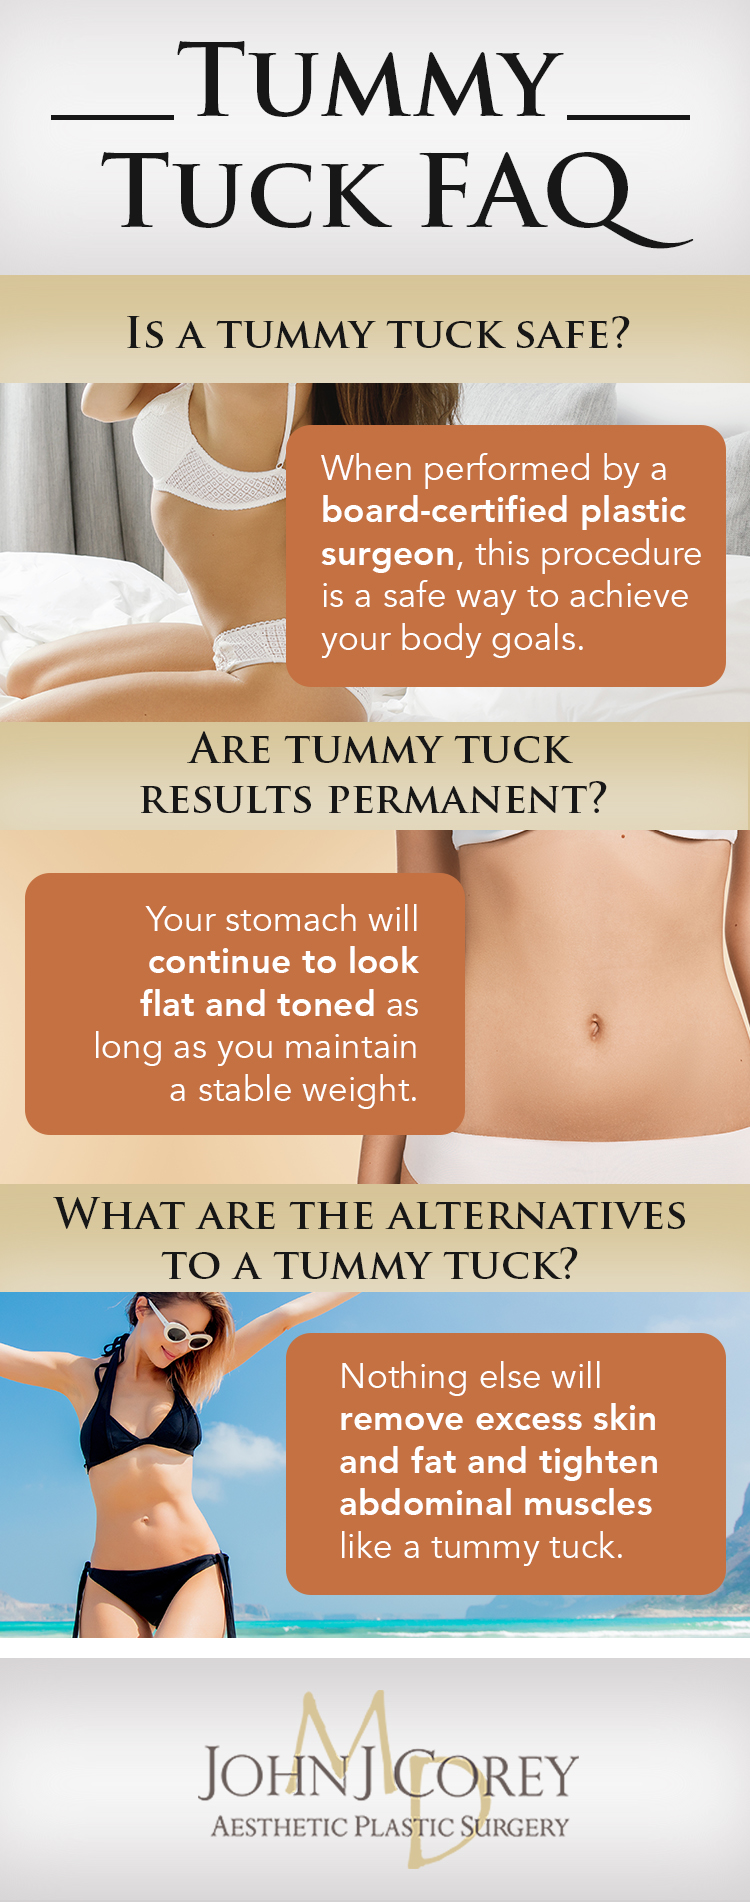 What to Avoid After a Tummy Tuck